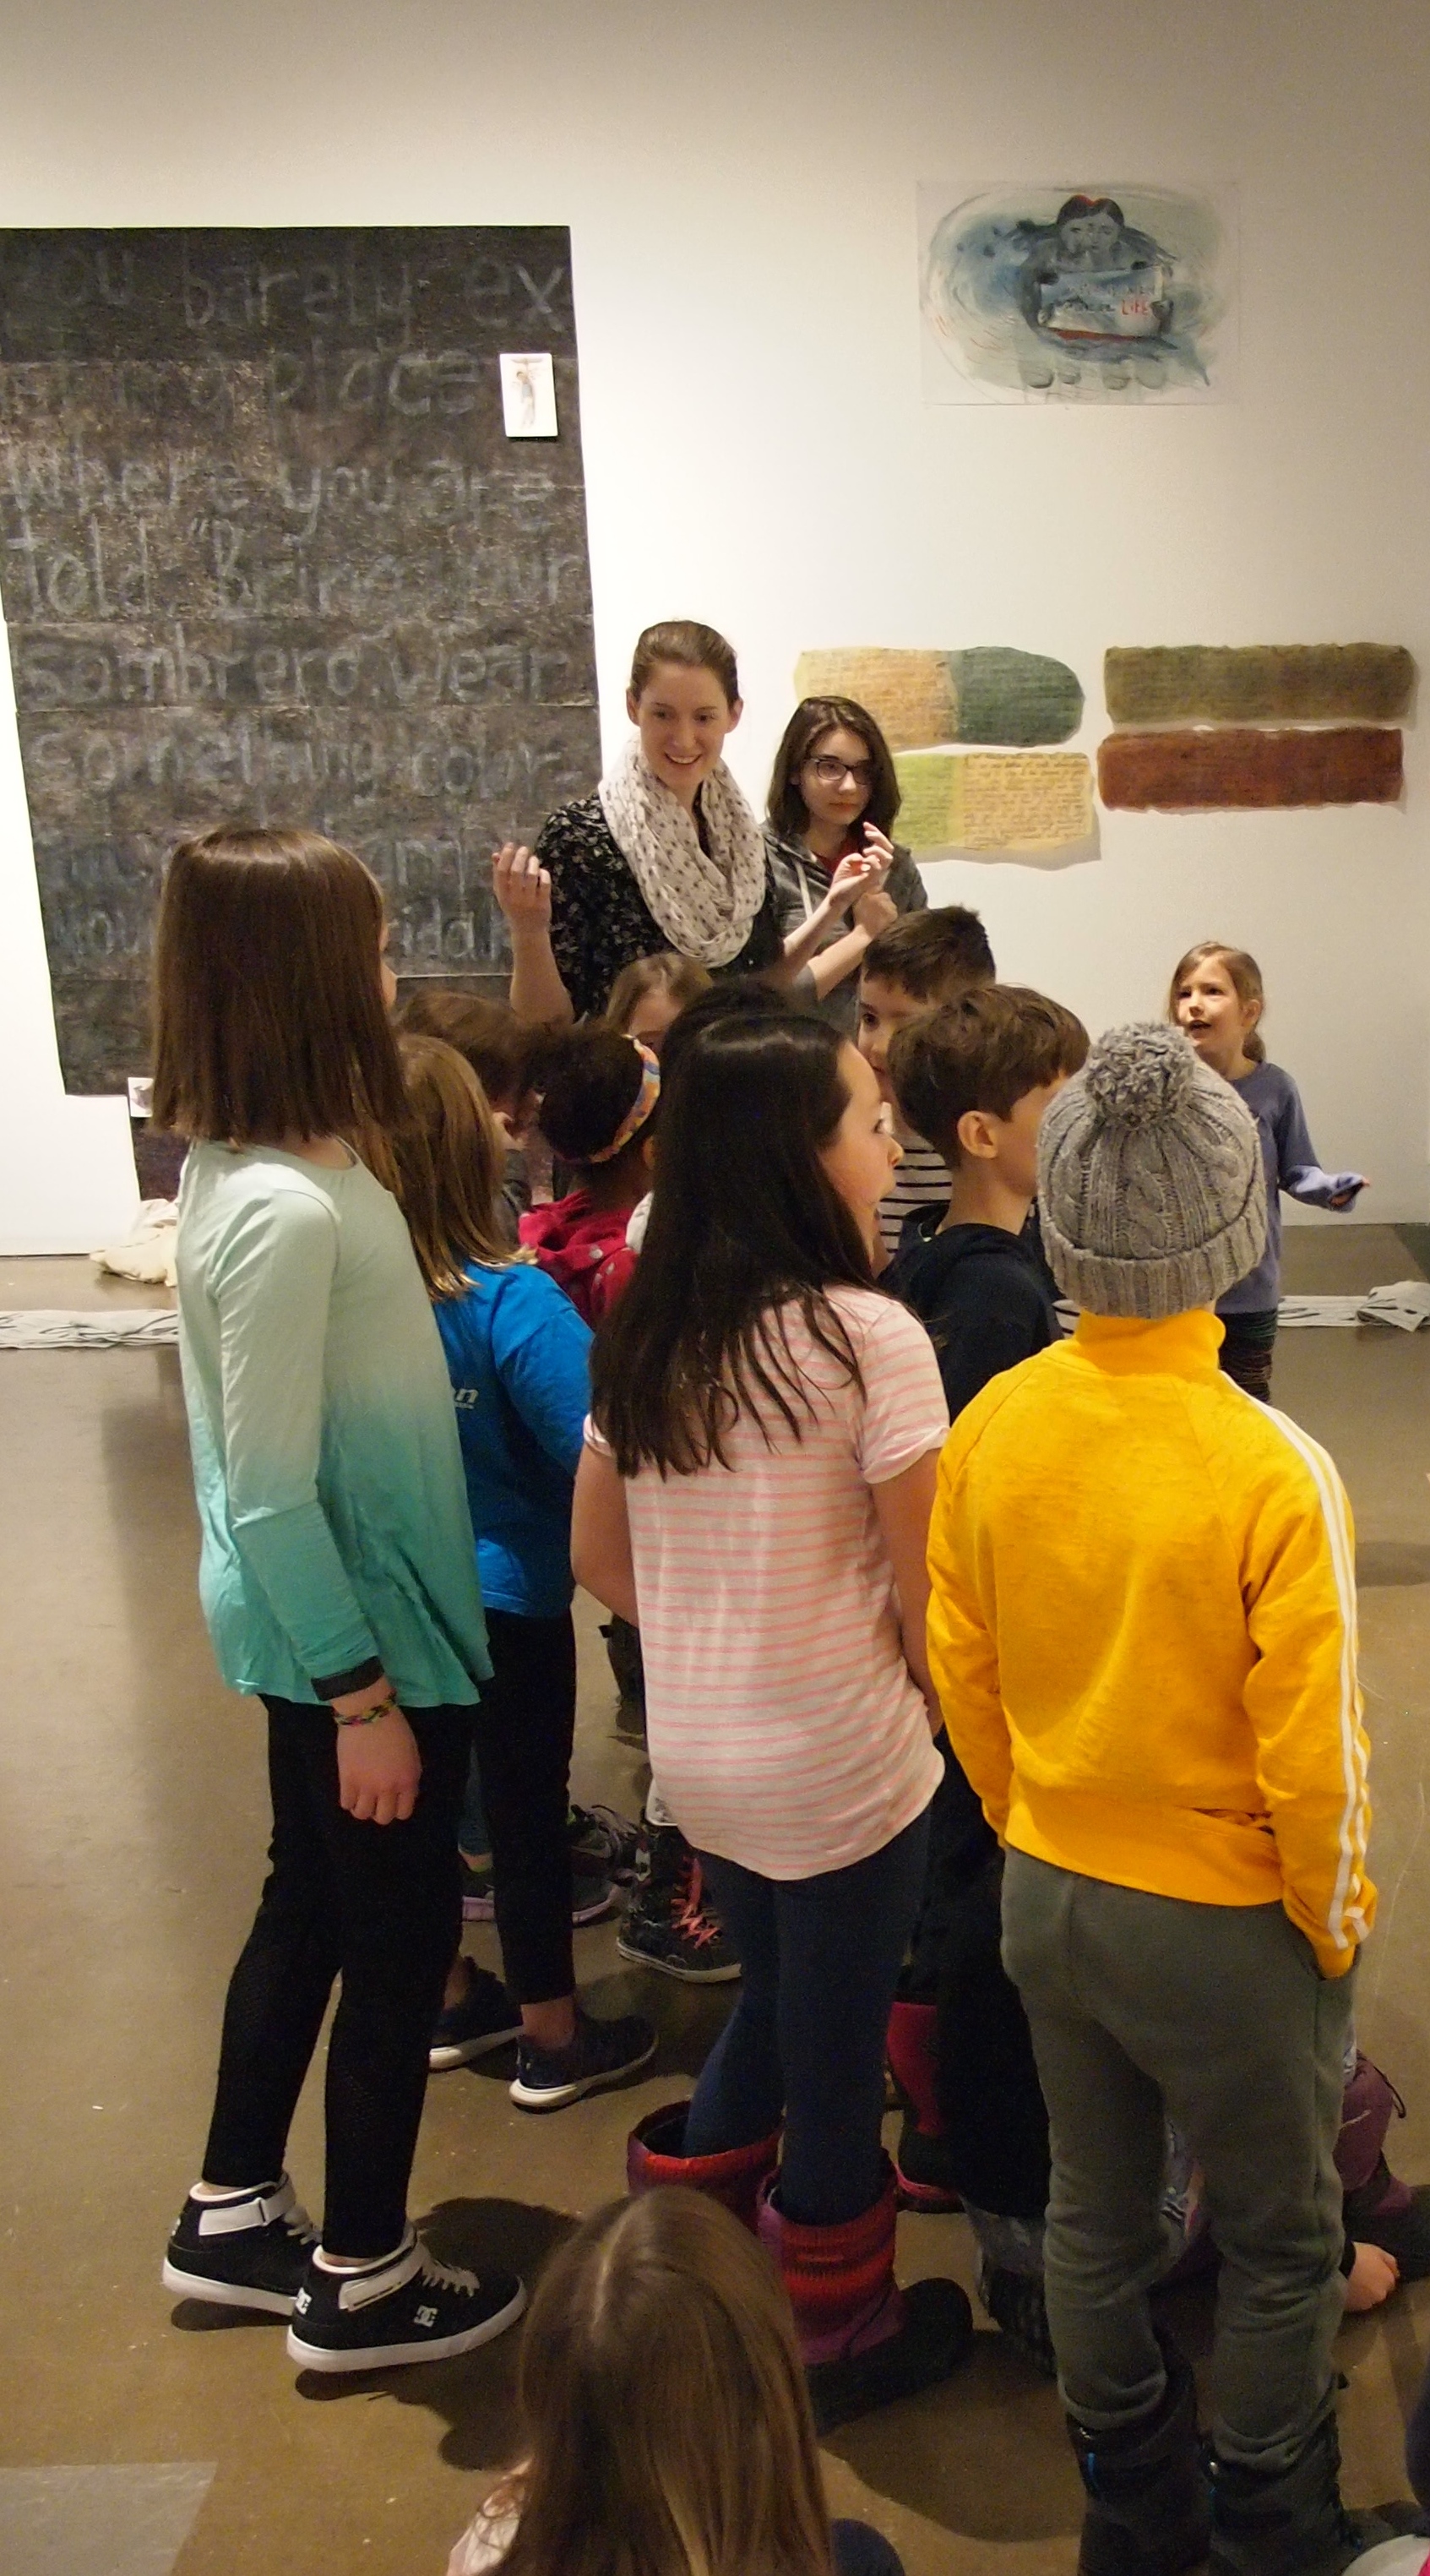 A group of school children stand together listening to a young woman in a dark top and light scarf explain artworks in a Lucie Chan exhibition of various drawings